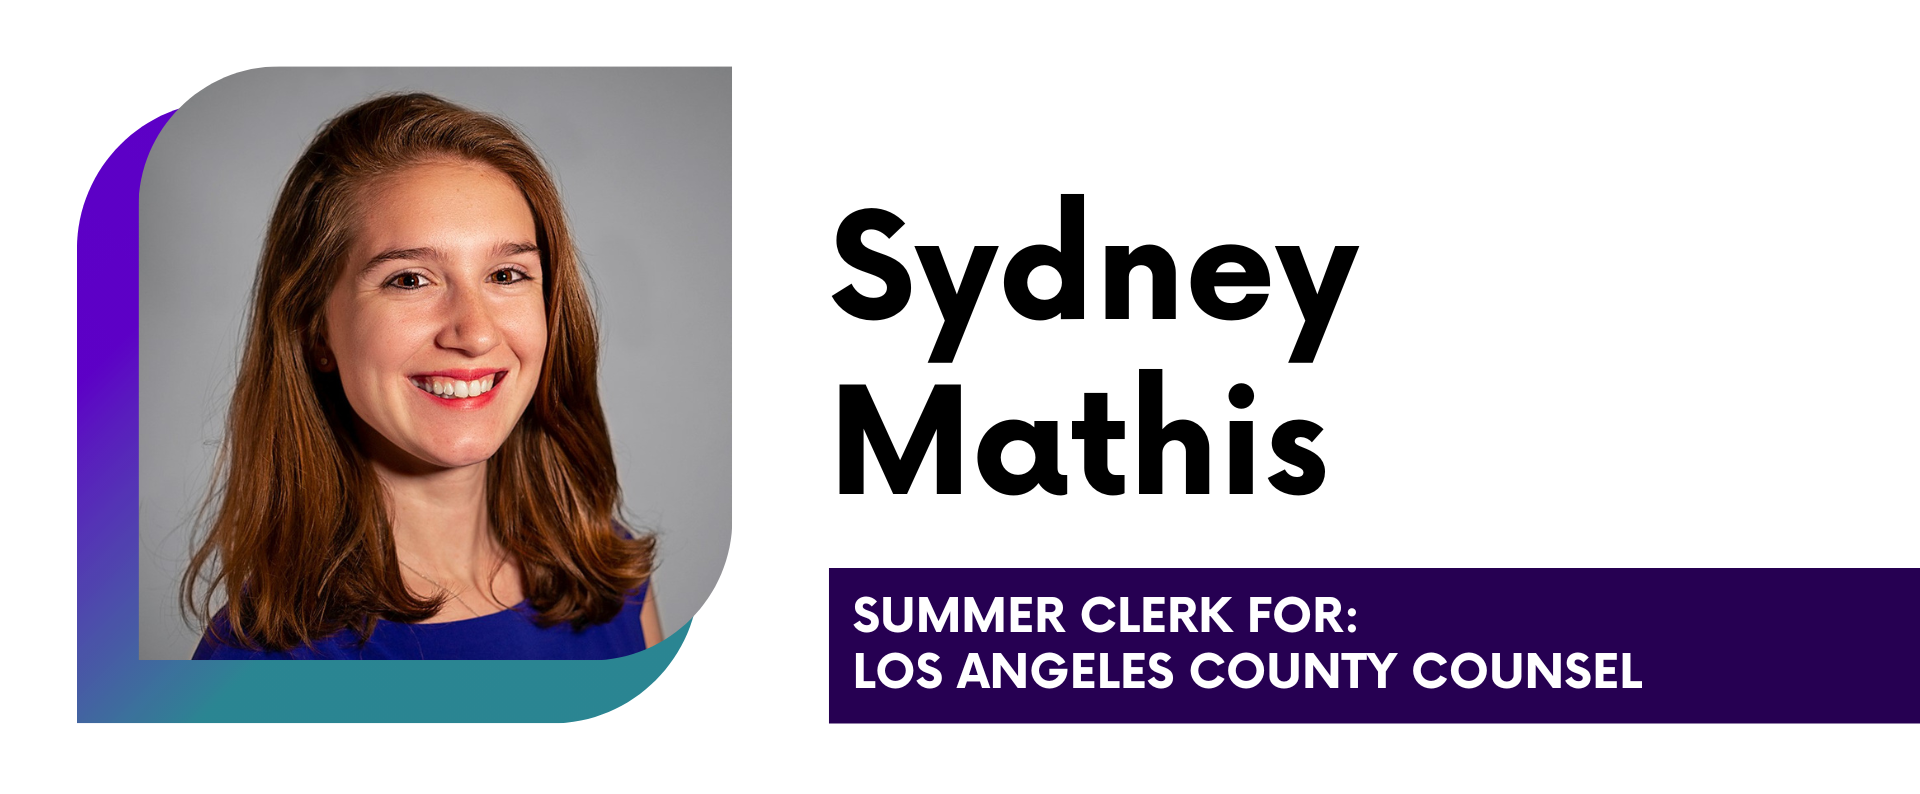 Sydney Mathis Summer Clerk for: Los Angeles County Counsel